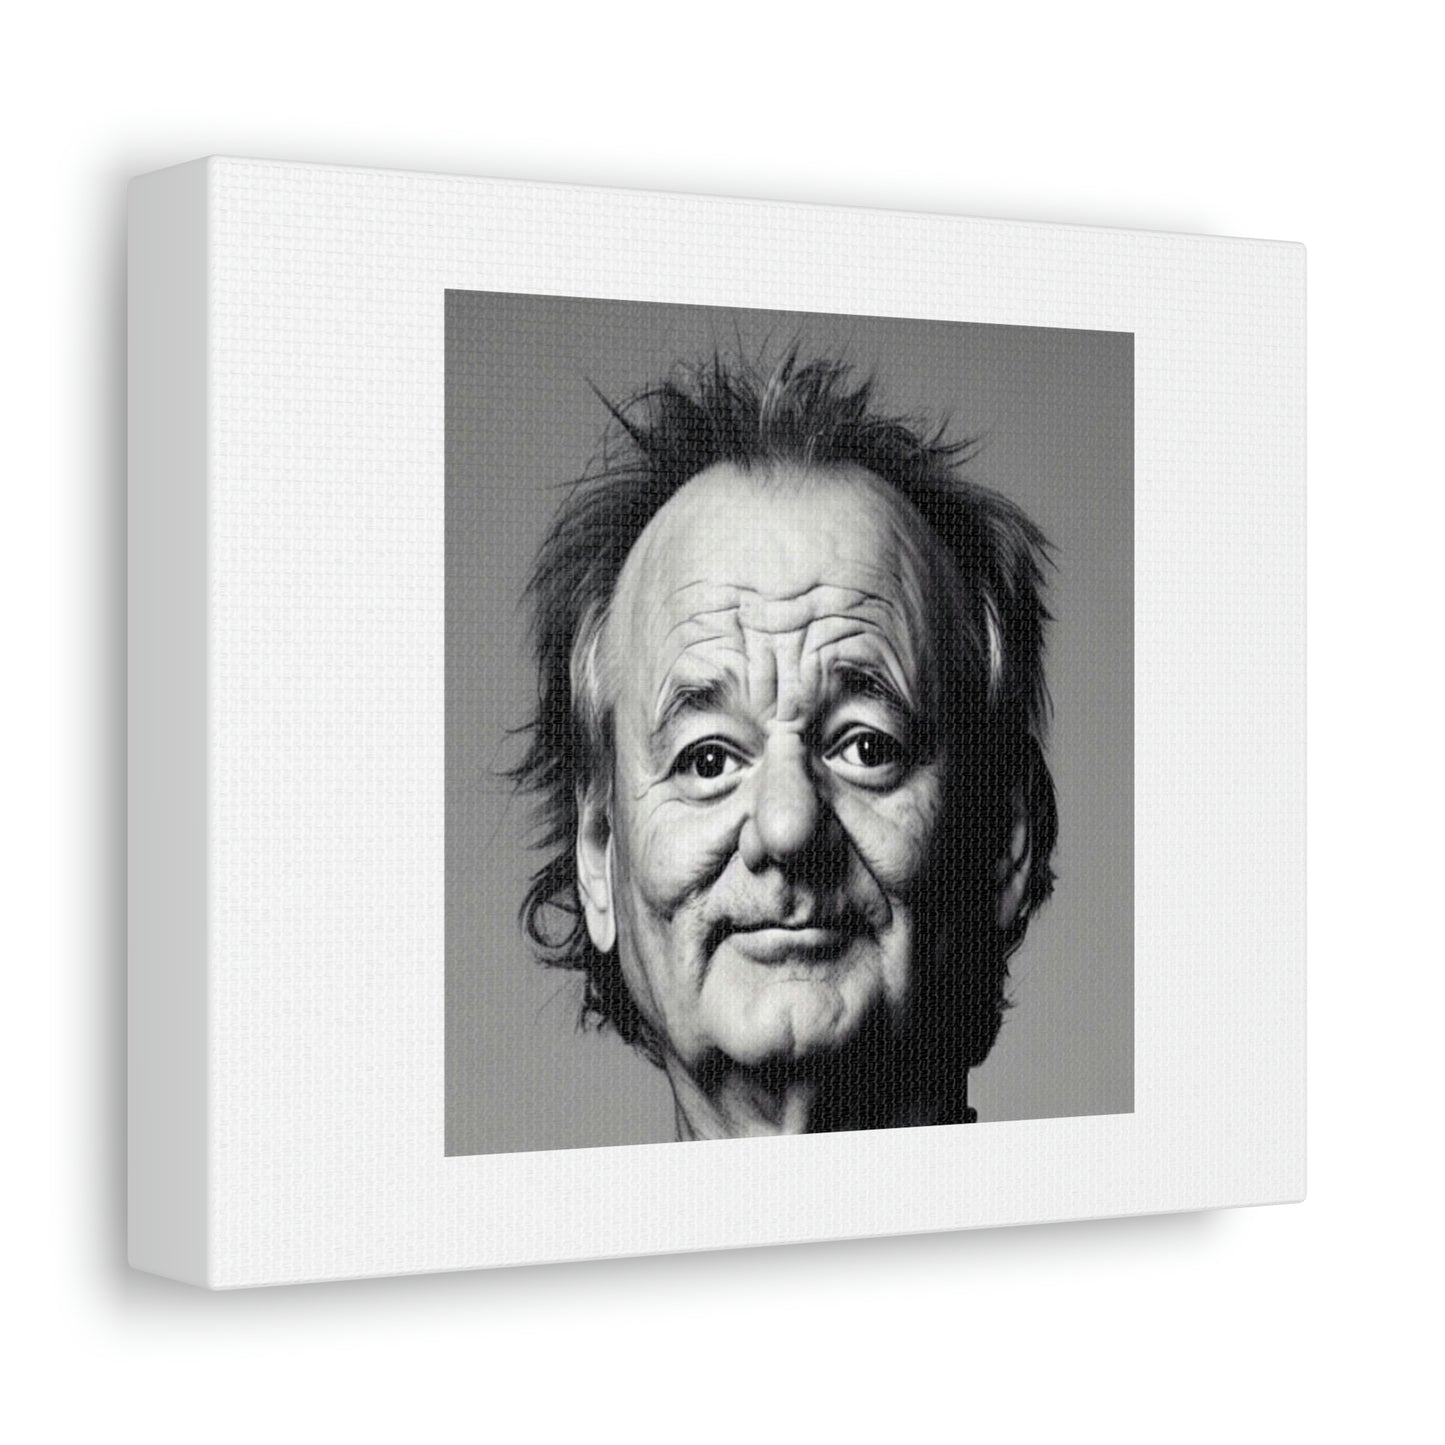 Bill Murray USA President Black And White Digital Art 'Designed by AI' on Canvas